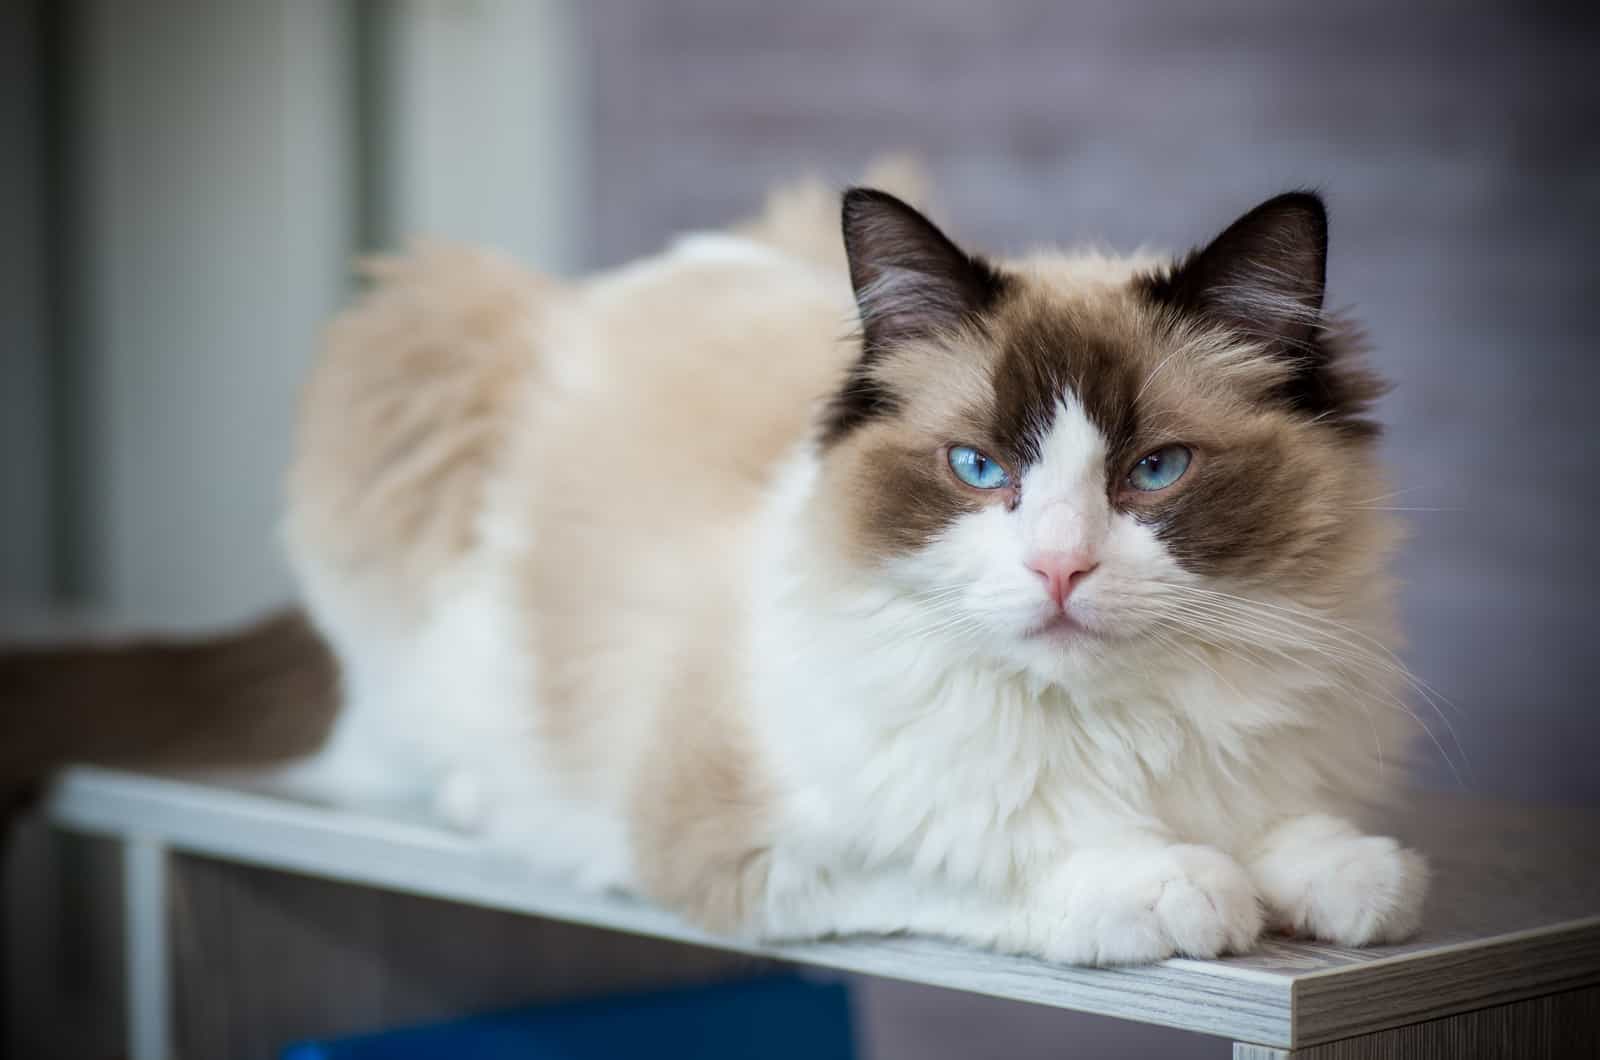 Ragdoll Kitten is lying on the shelf and resting